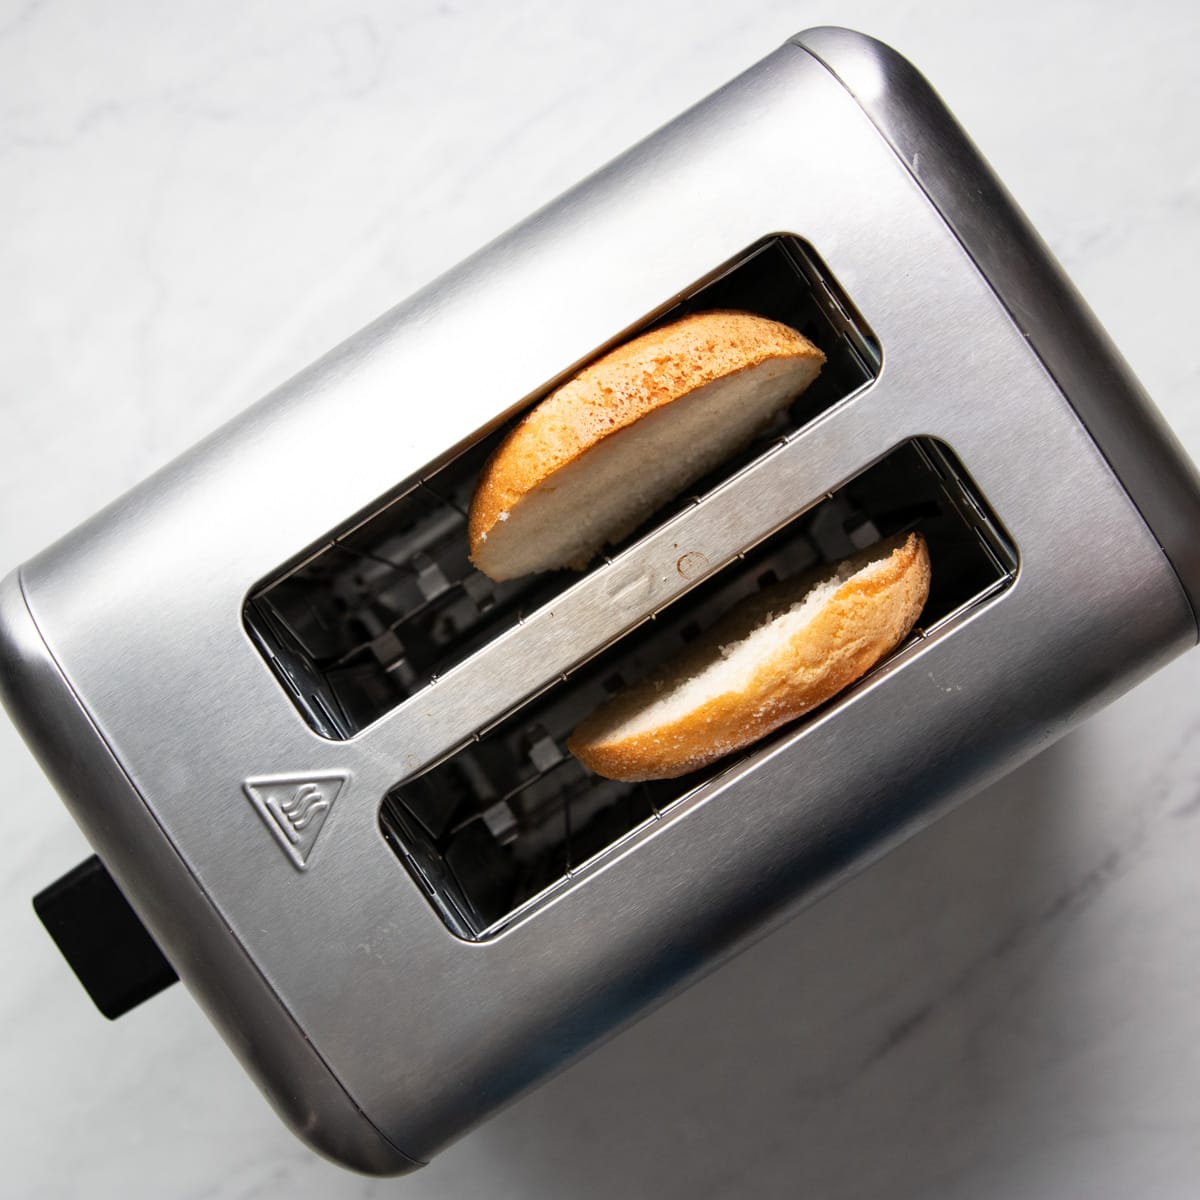 English muffin halves sitting in a toaster